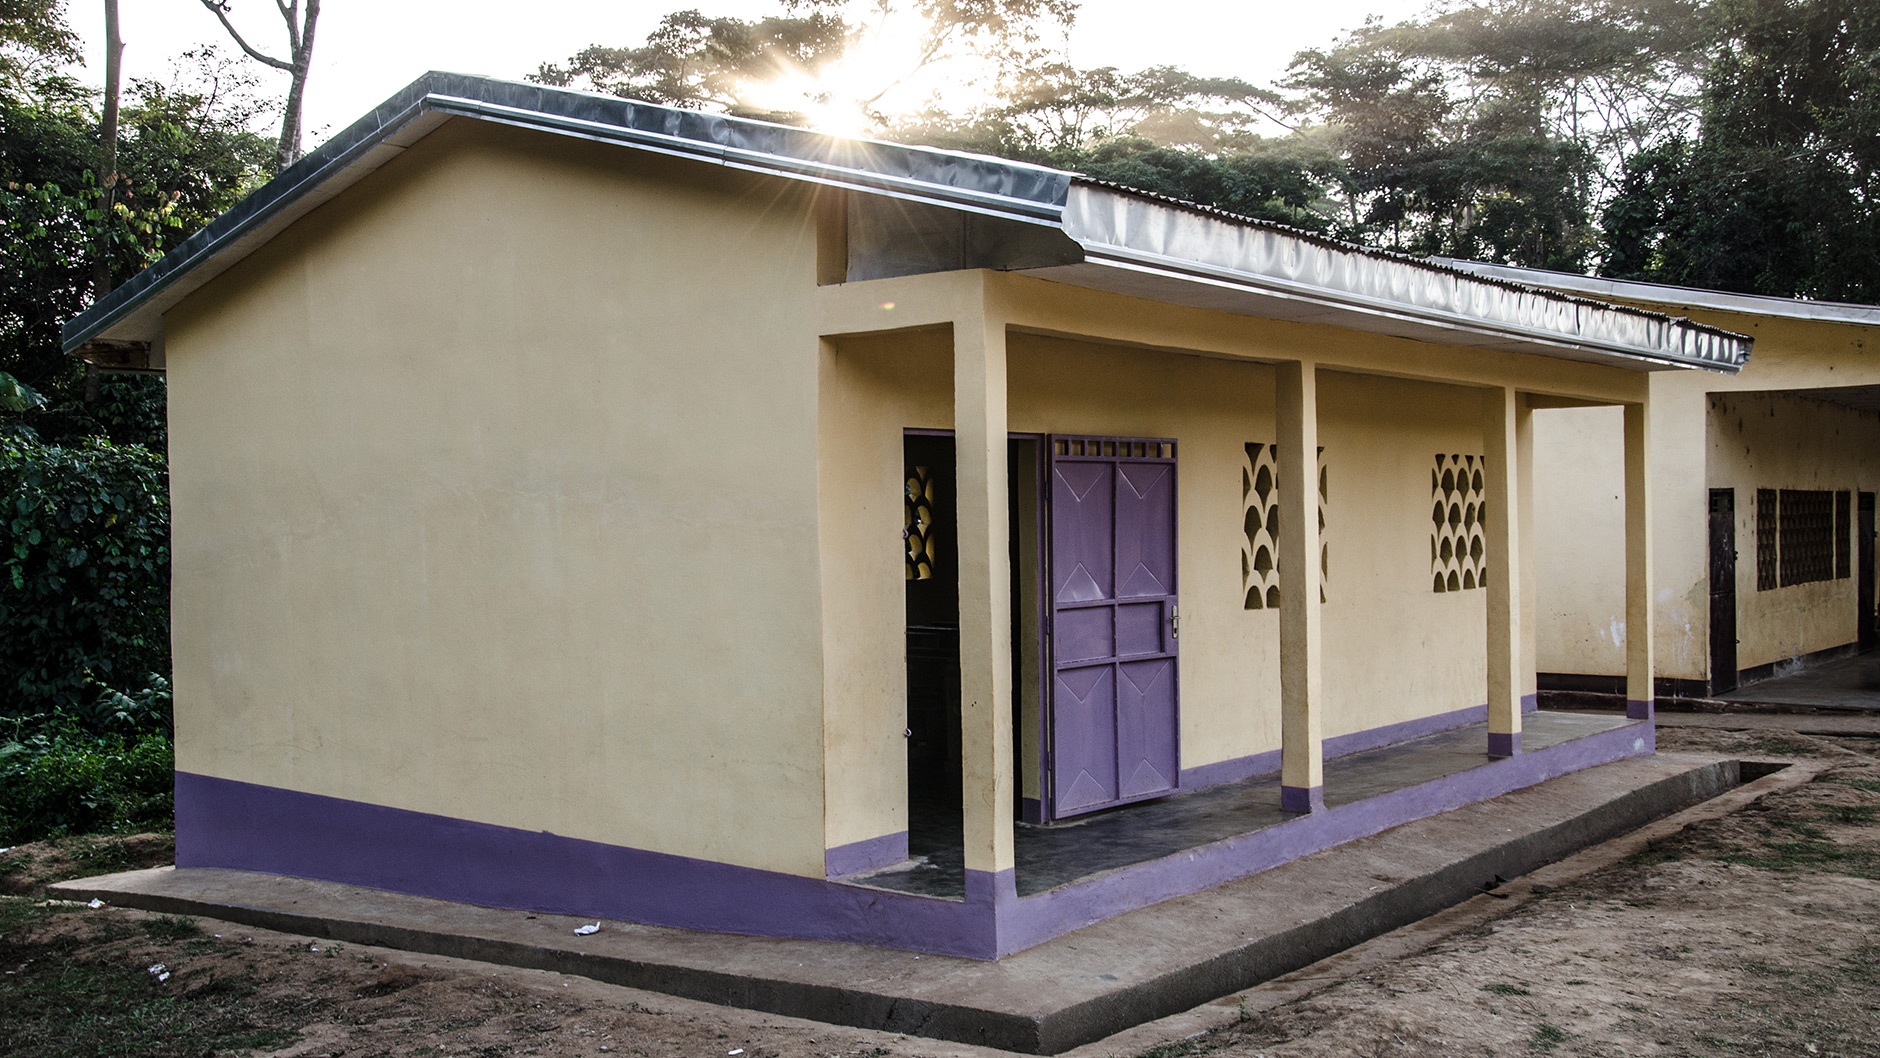 Refurbished classrooms in Biombe Cameroon